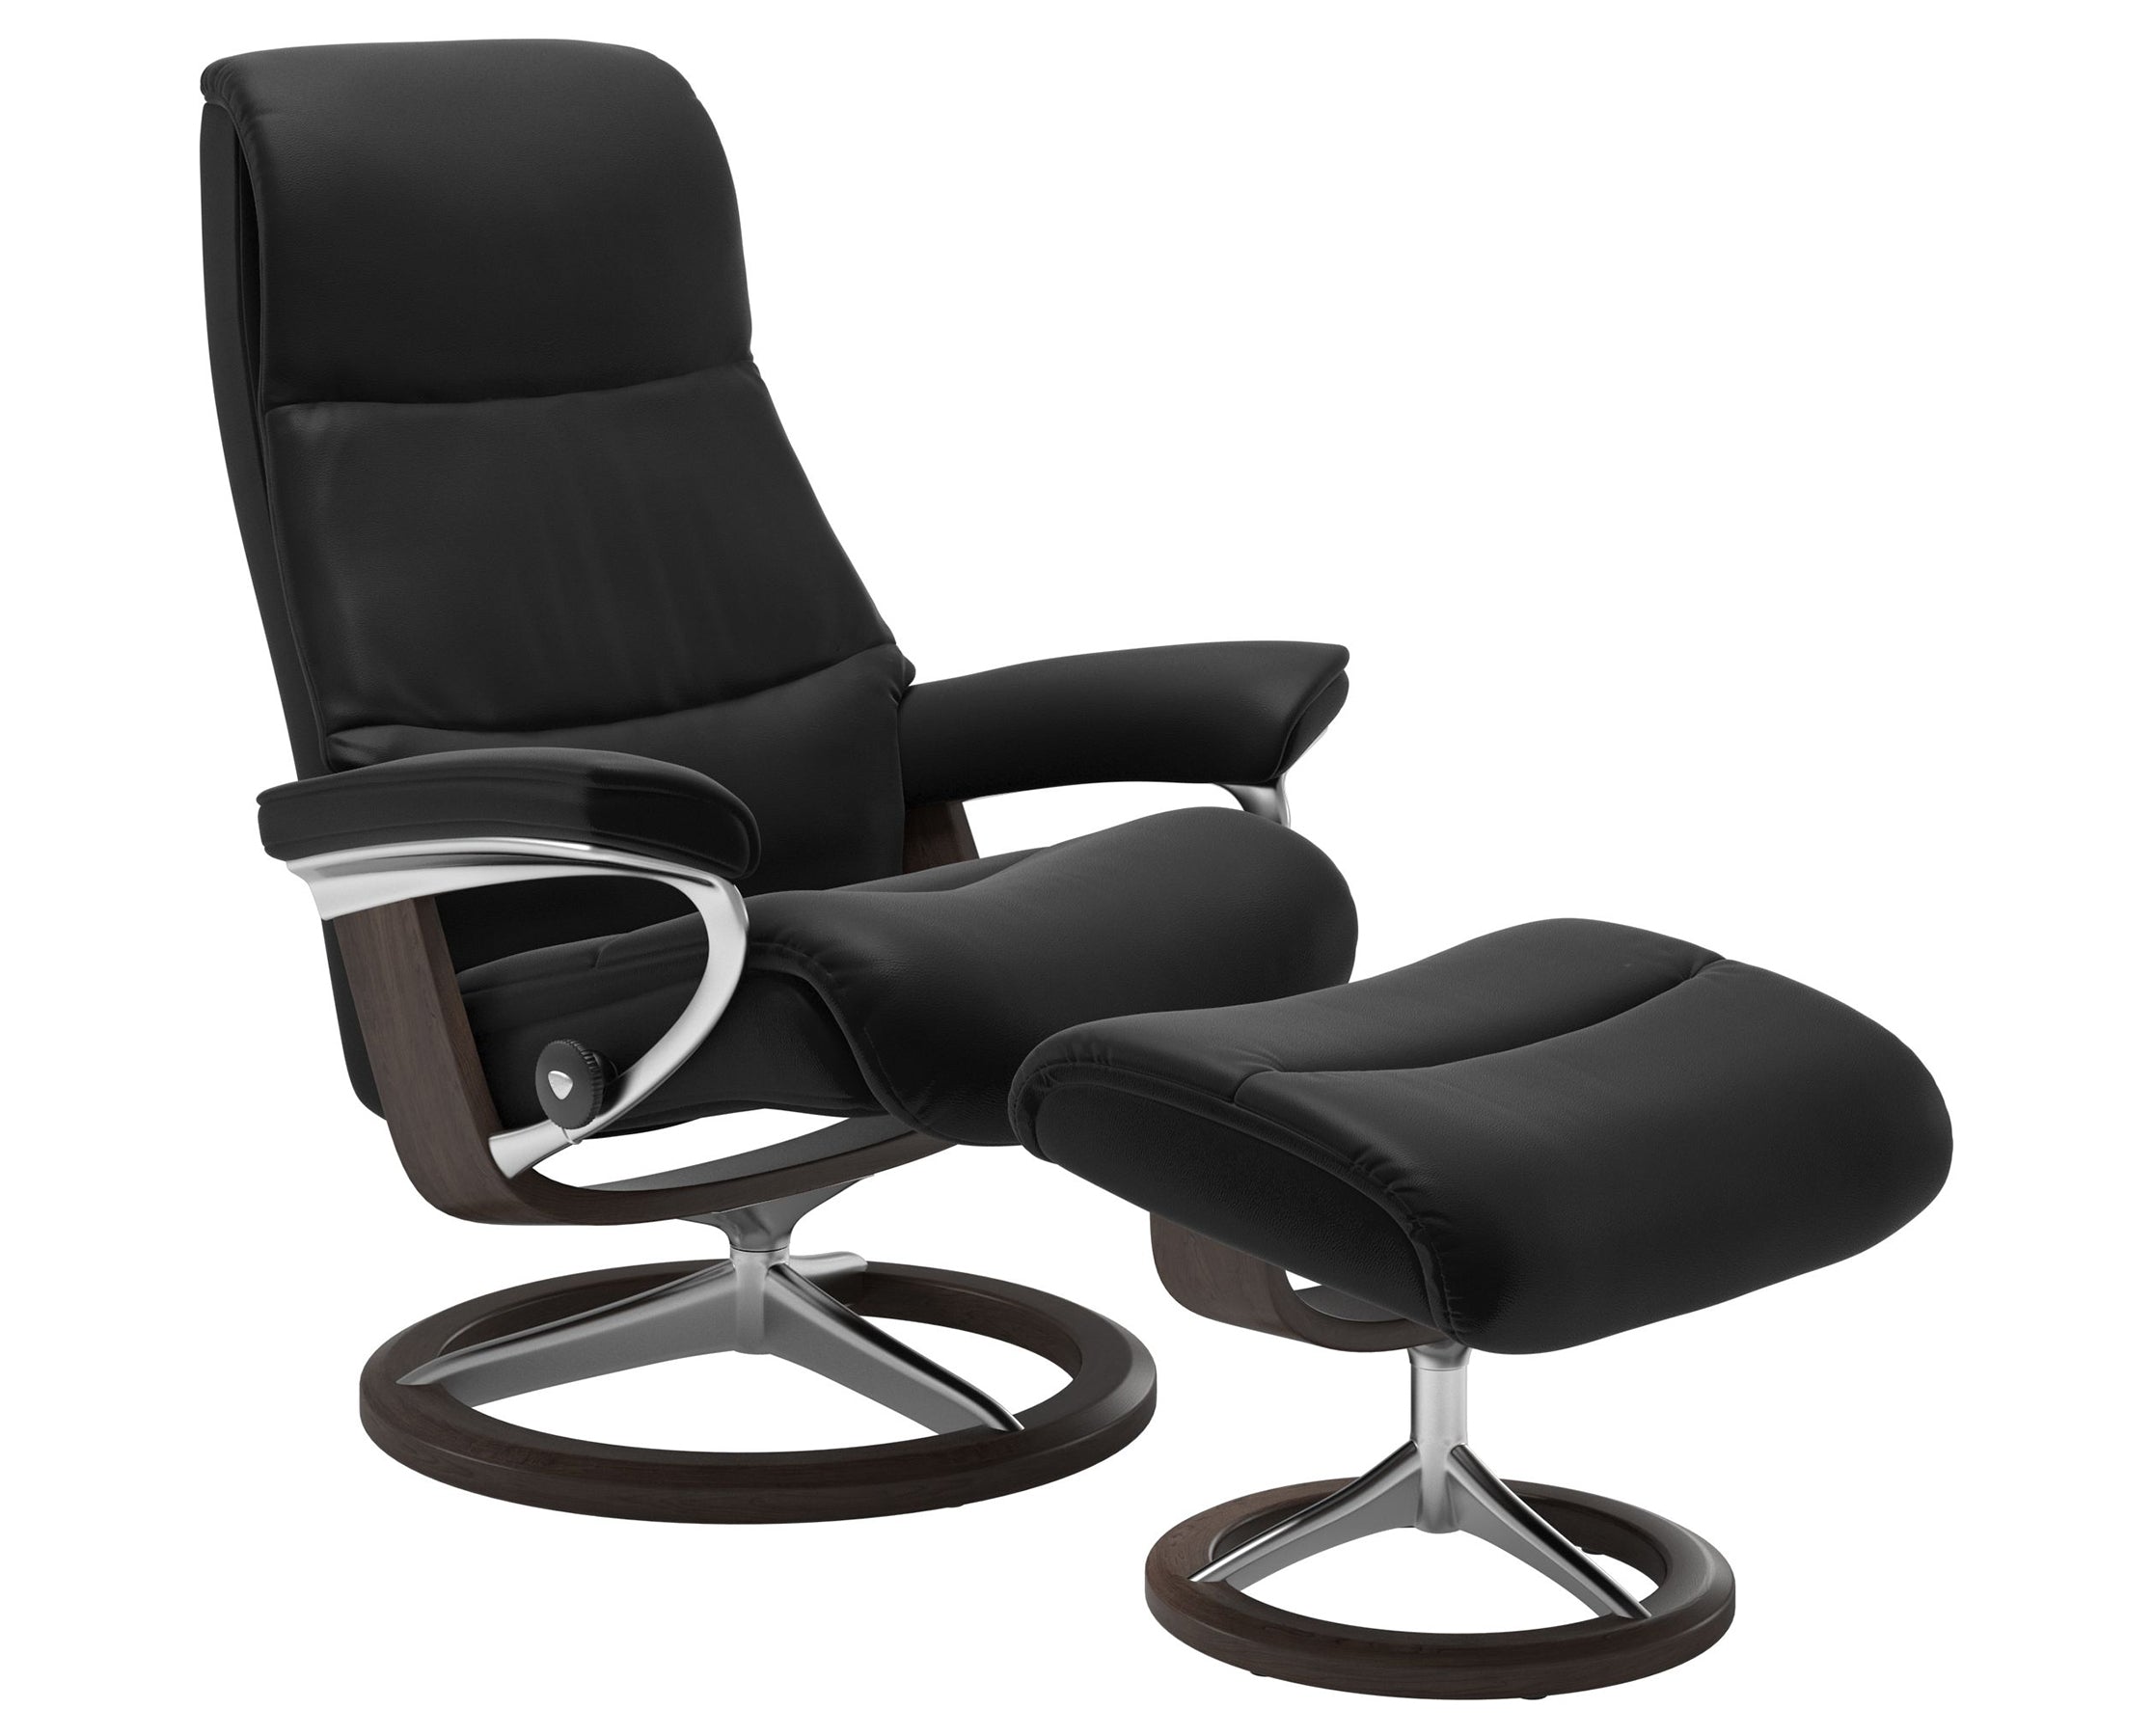 Paloma Leather Black S/M/L and Wenge Base | Stressless View Signature Recliner | Valley Ridge Furniture